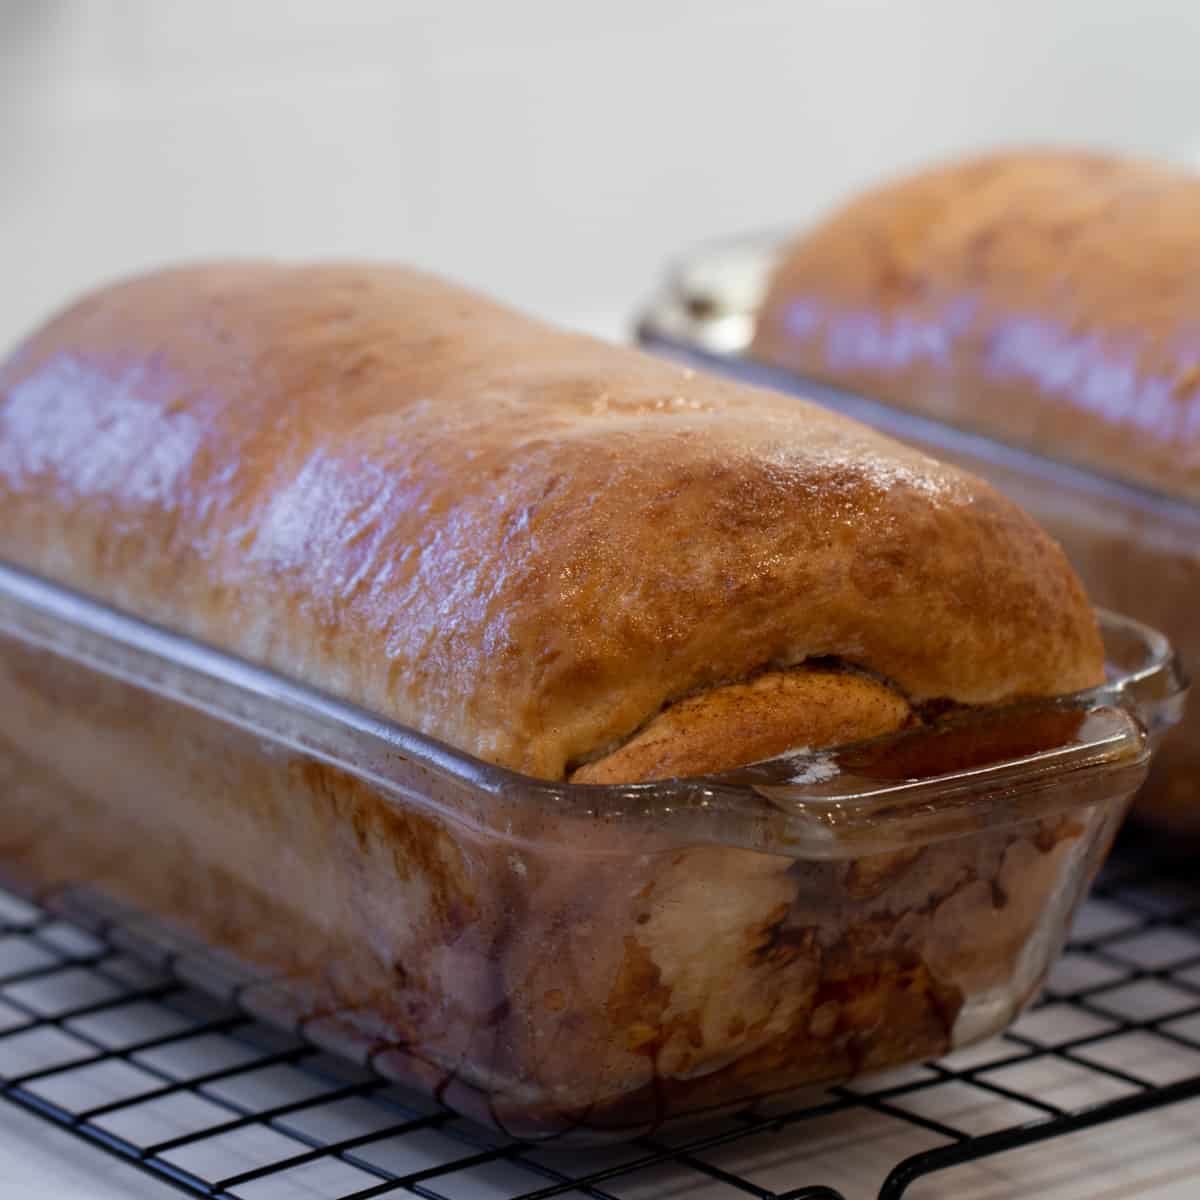 Two loaves of baked bread in glass loaf pans.